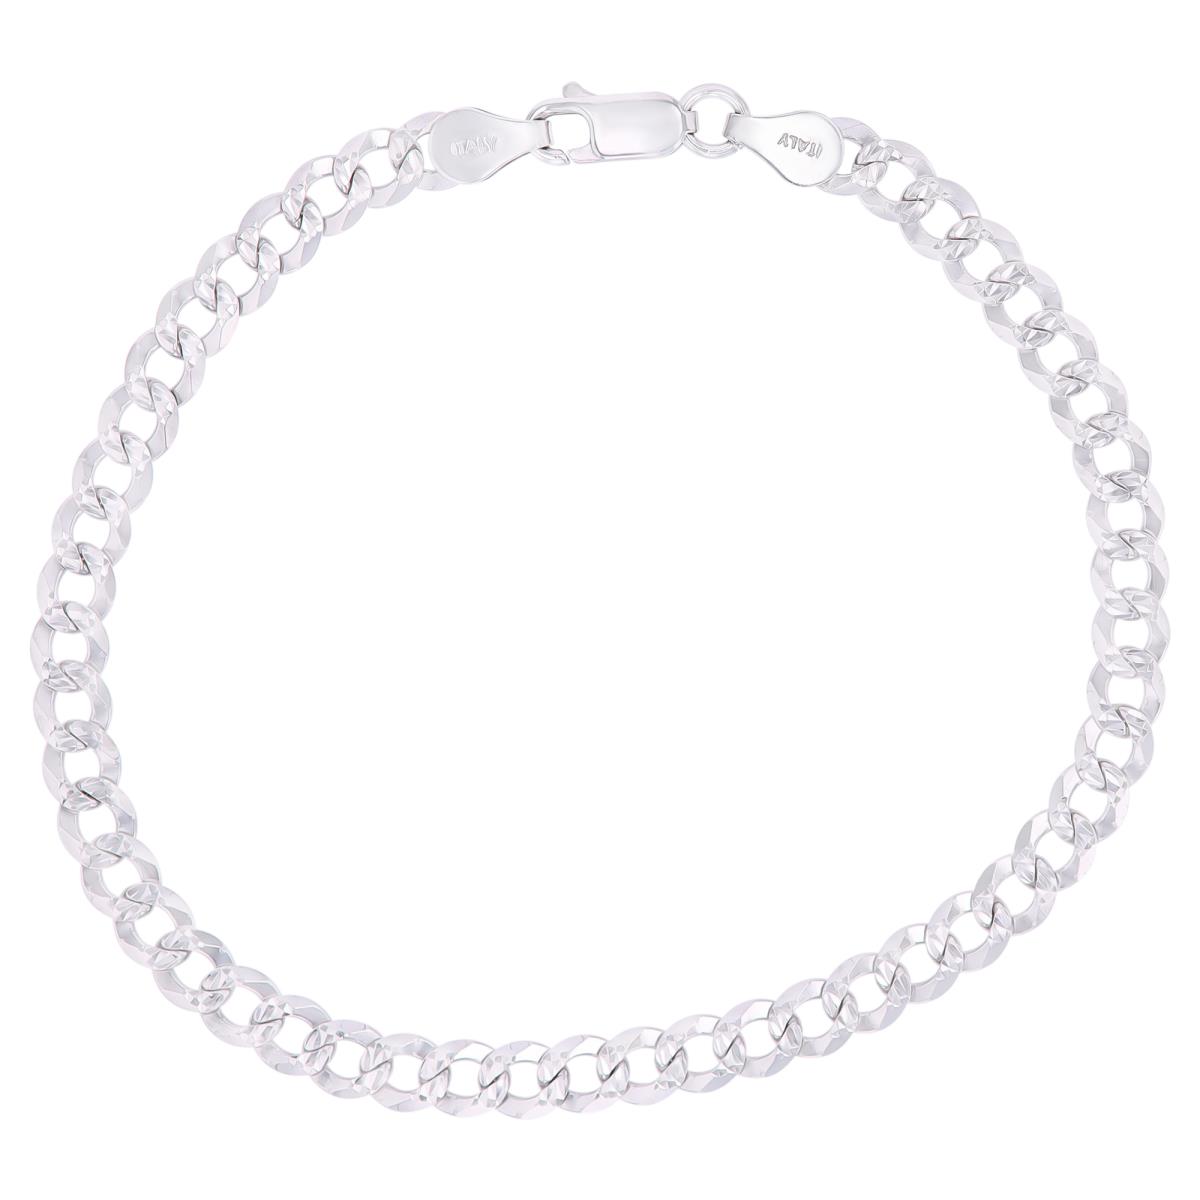 Sterling Silver Anti-Tarnish DC 5mm 150 Curb Pave 8.25"Chain Bracelet